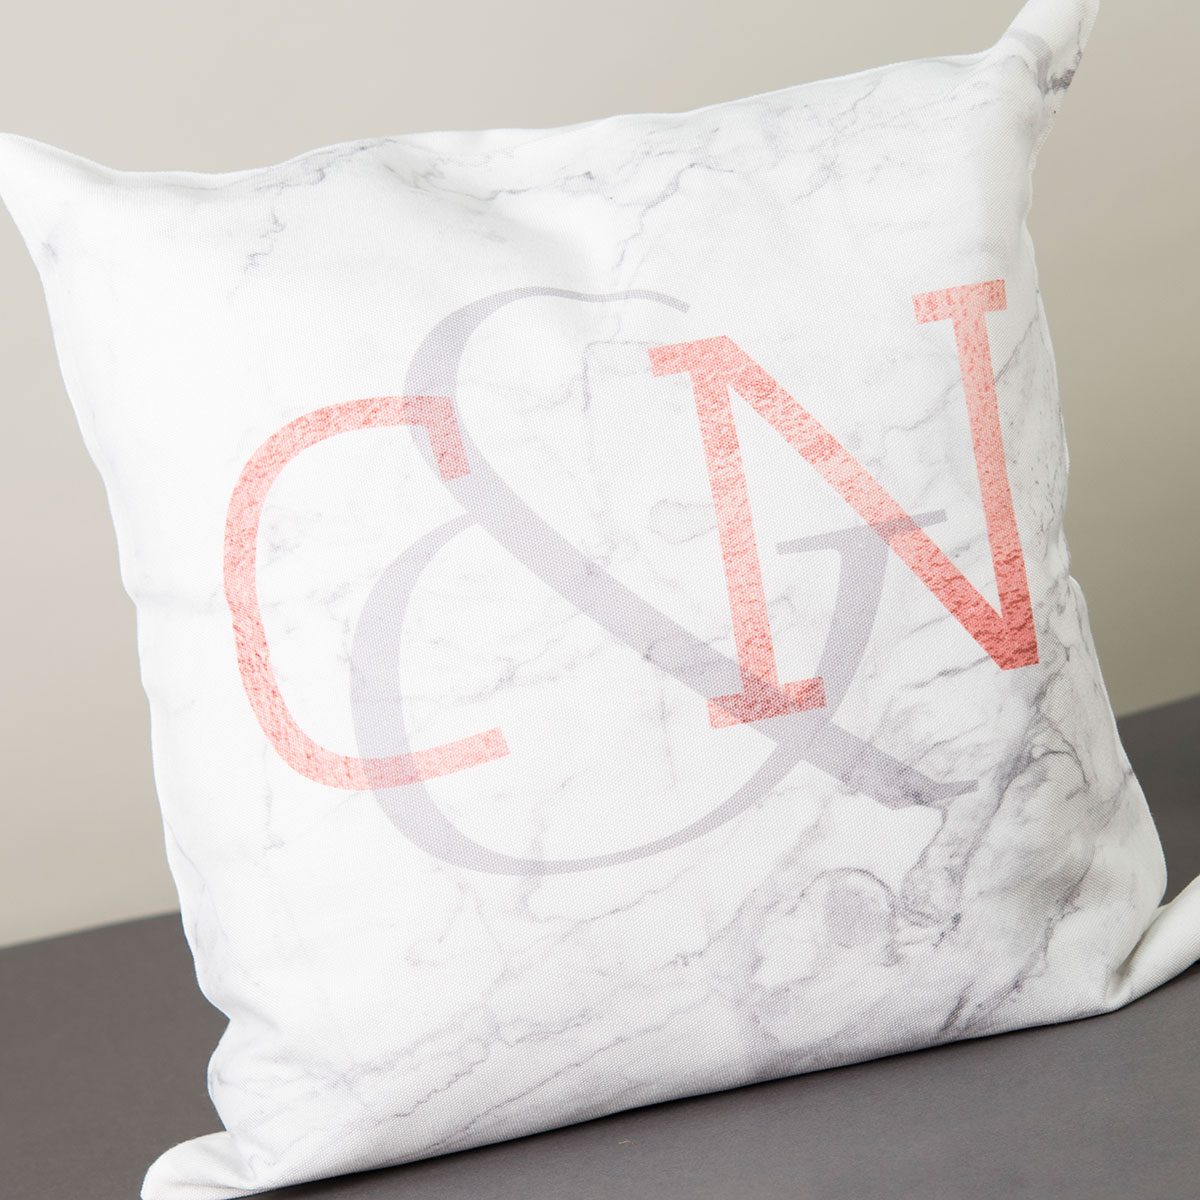 Personalised Cushion - Grey Marble Initials